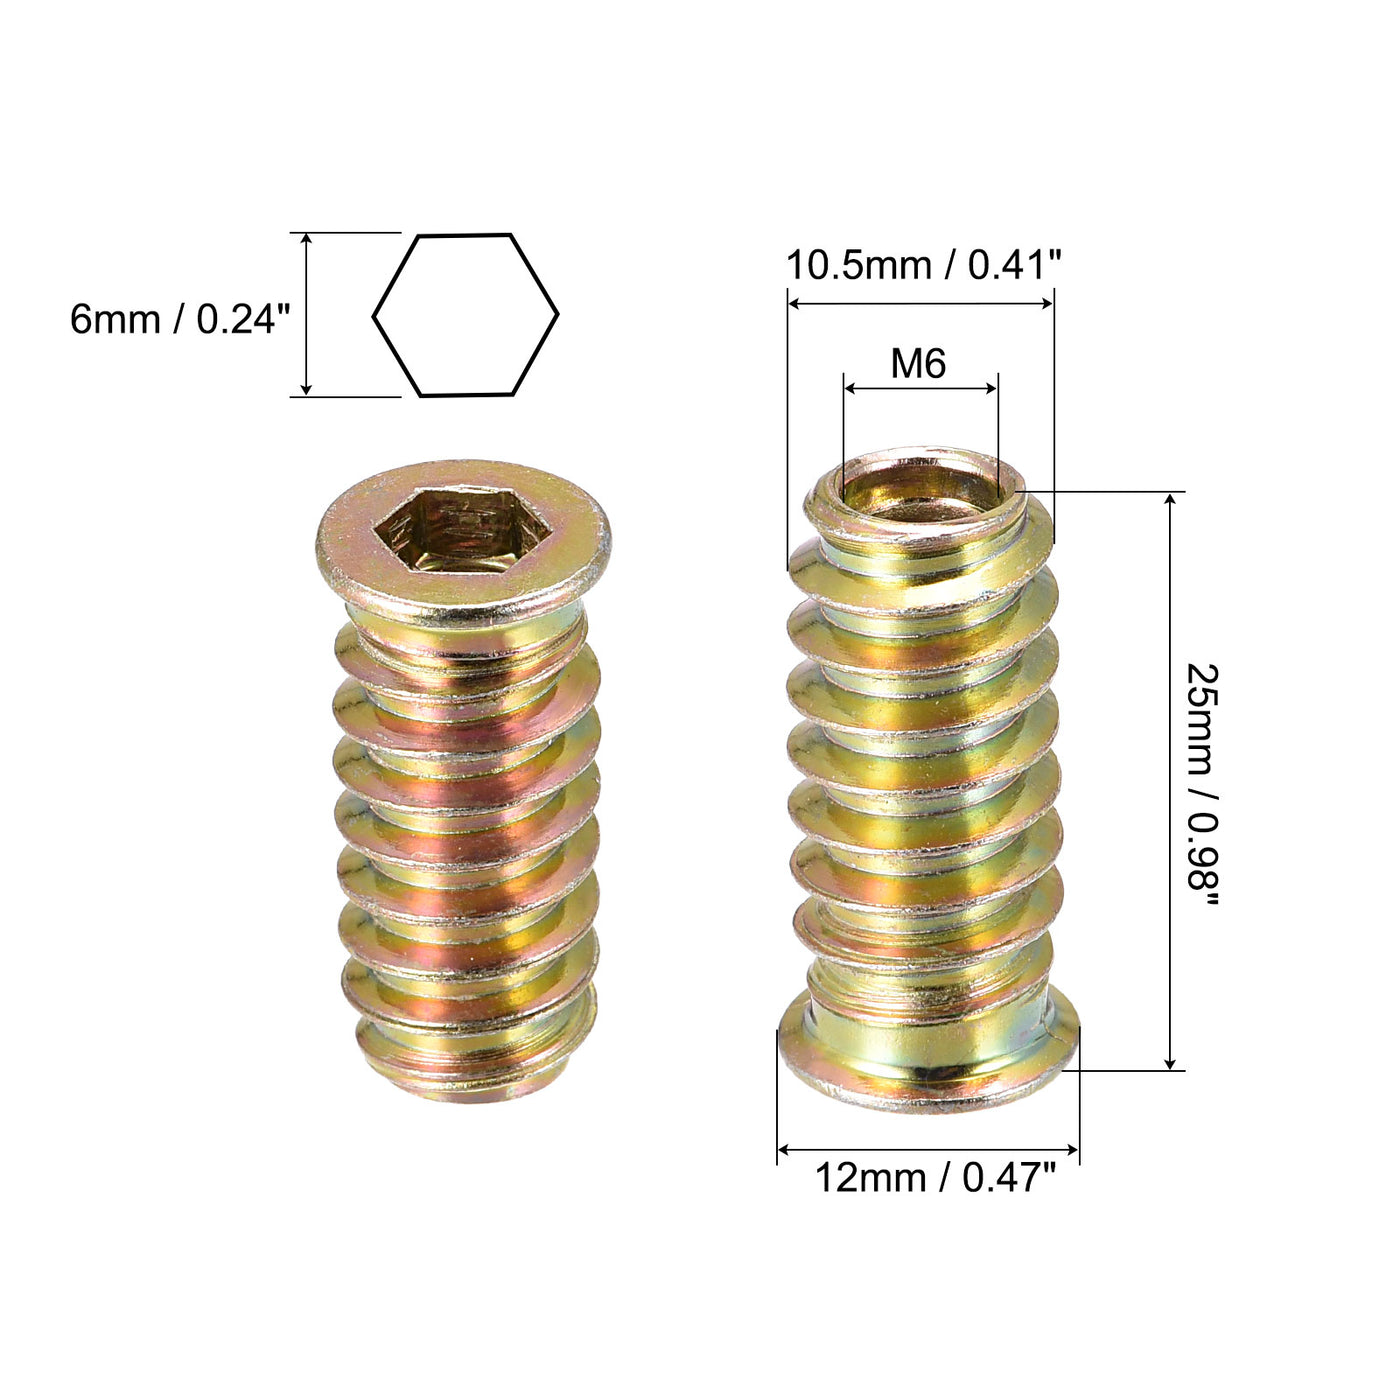 uxcell Uxcell M6x25mm Threaded Inserts for Wood Hex Socket Drive Furniture Screw-in Nut 64pcs